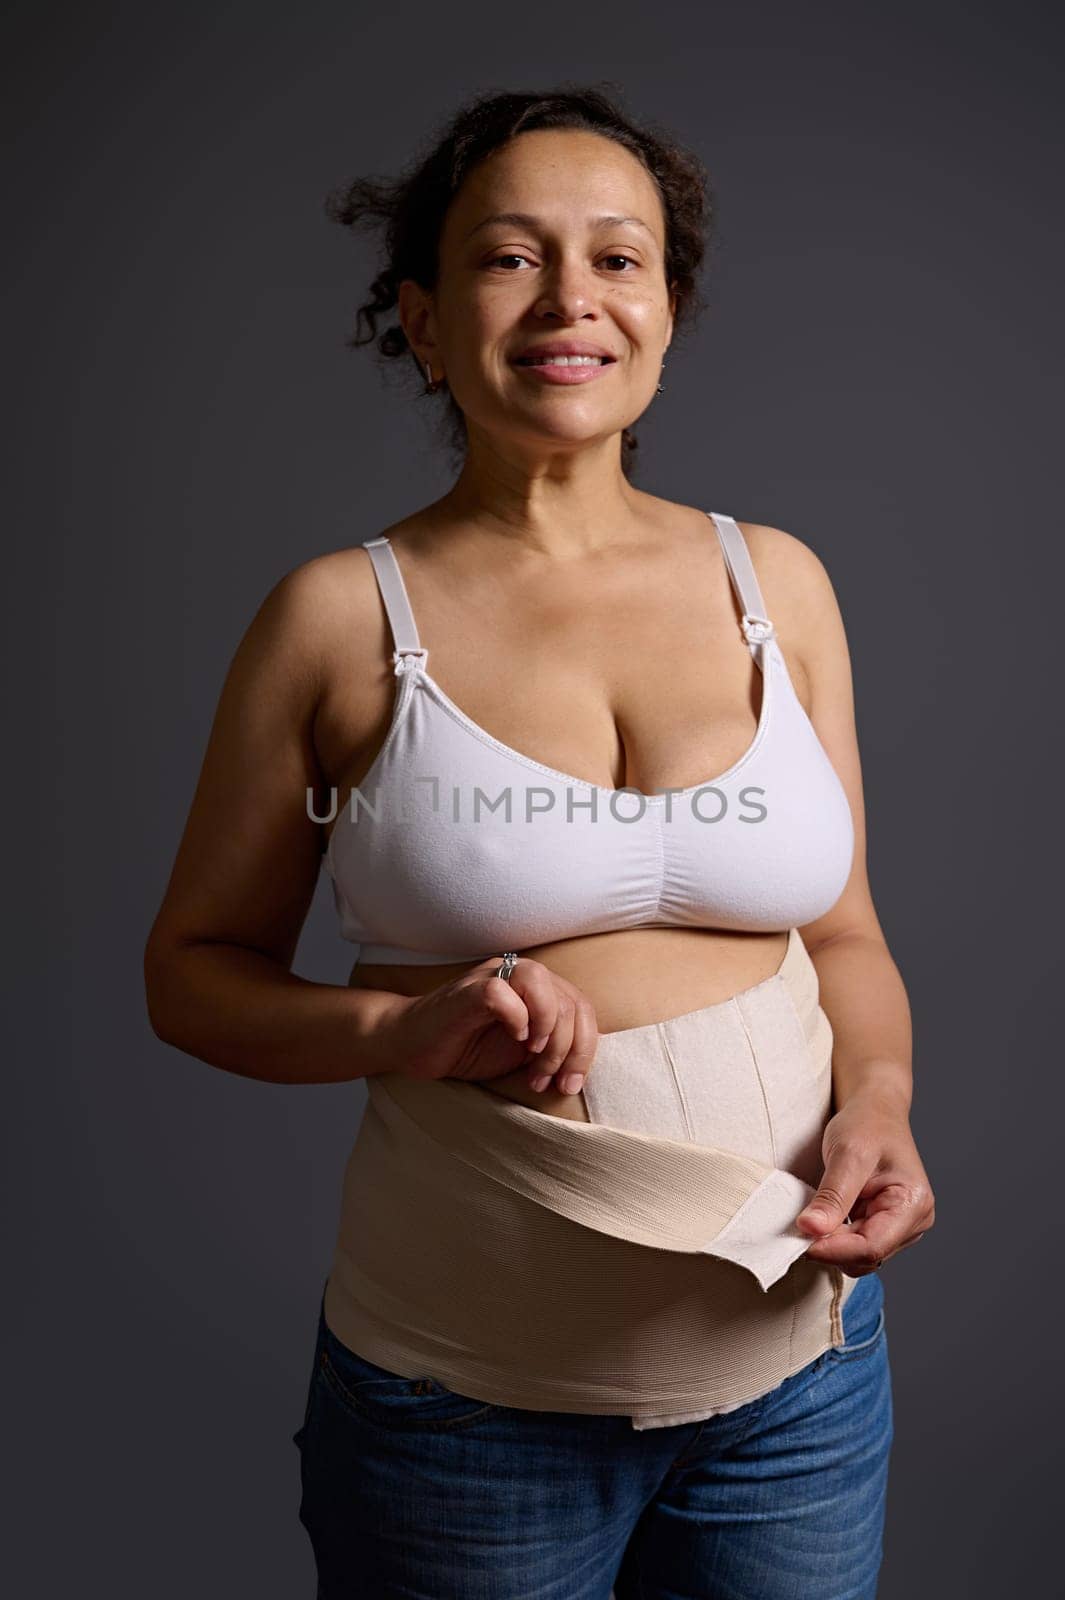 Authentic smiling young mother putting on elastic bandage after cesarean c-section, looking at camera, isolated backdrop by artgf